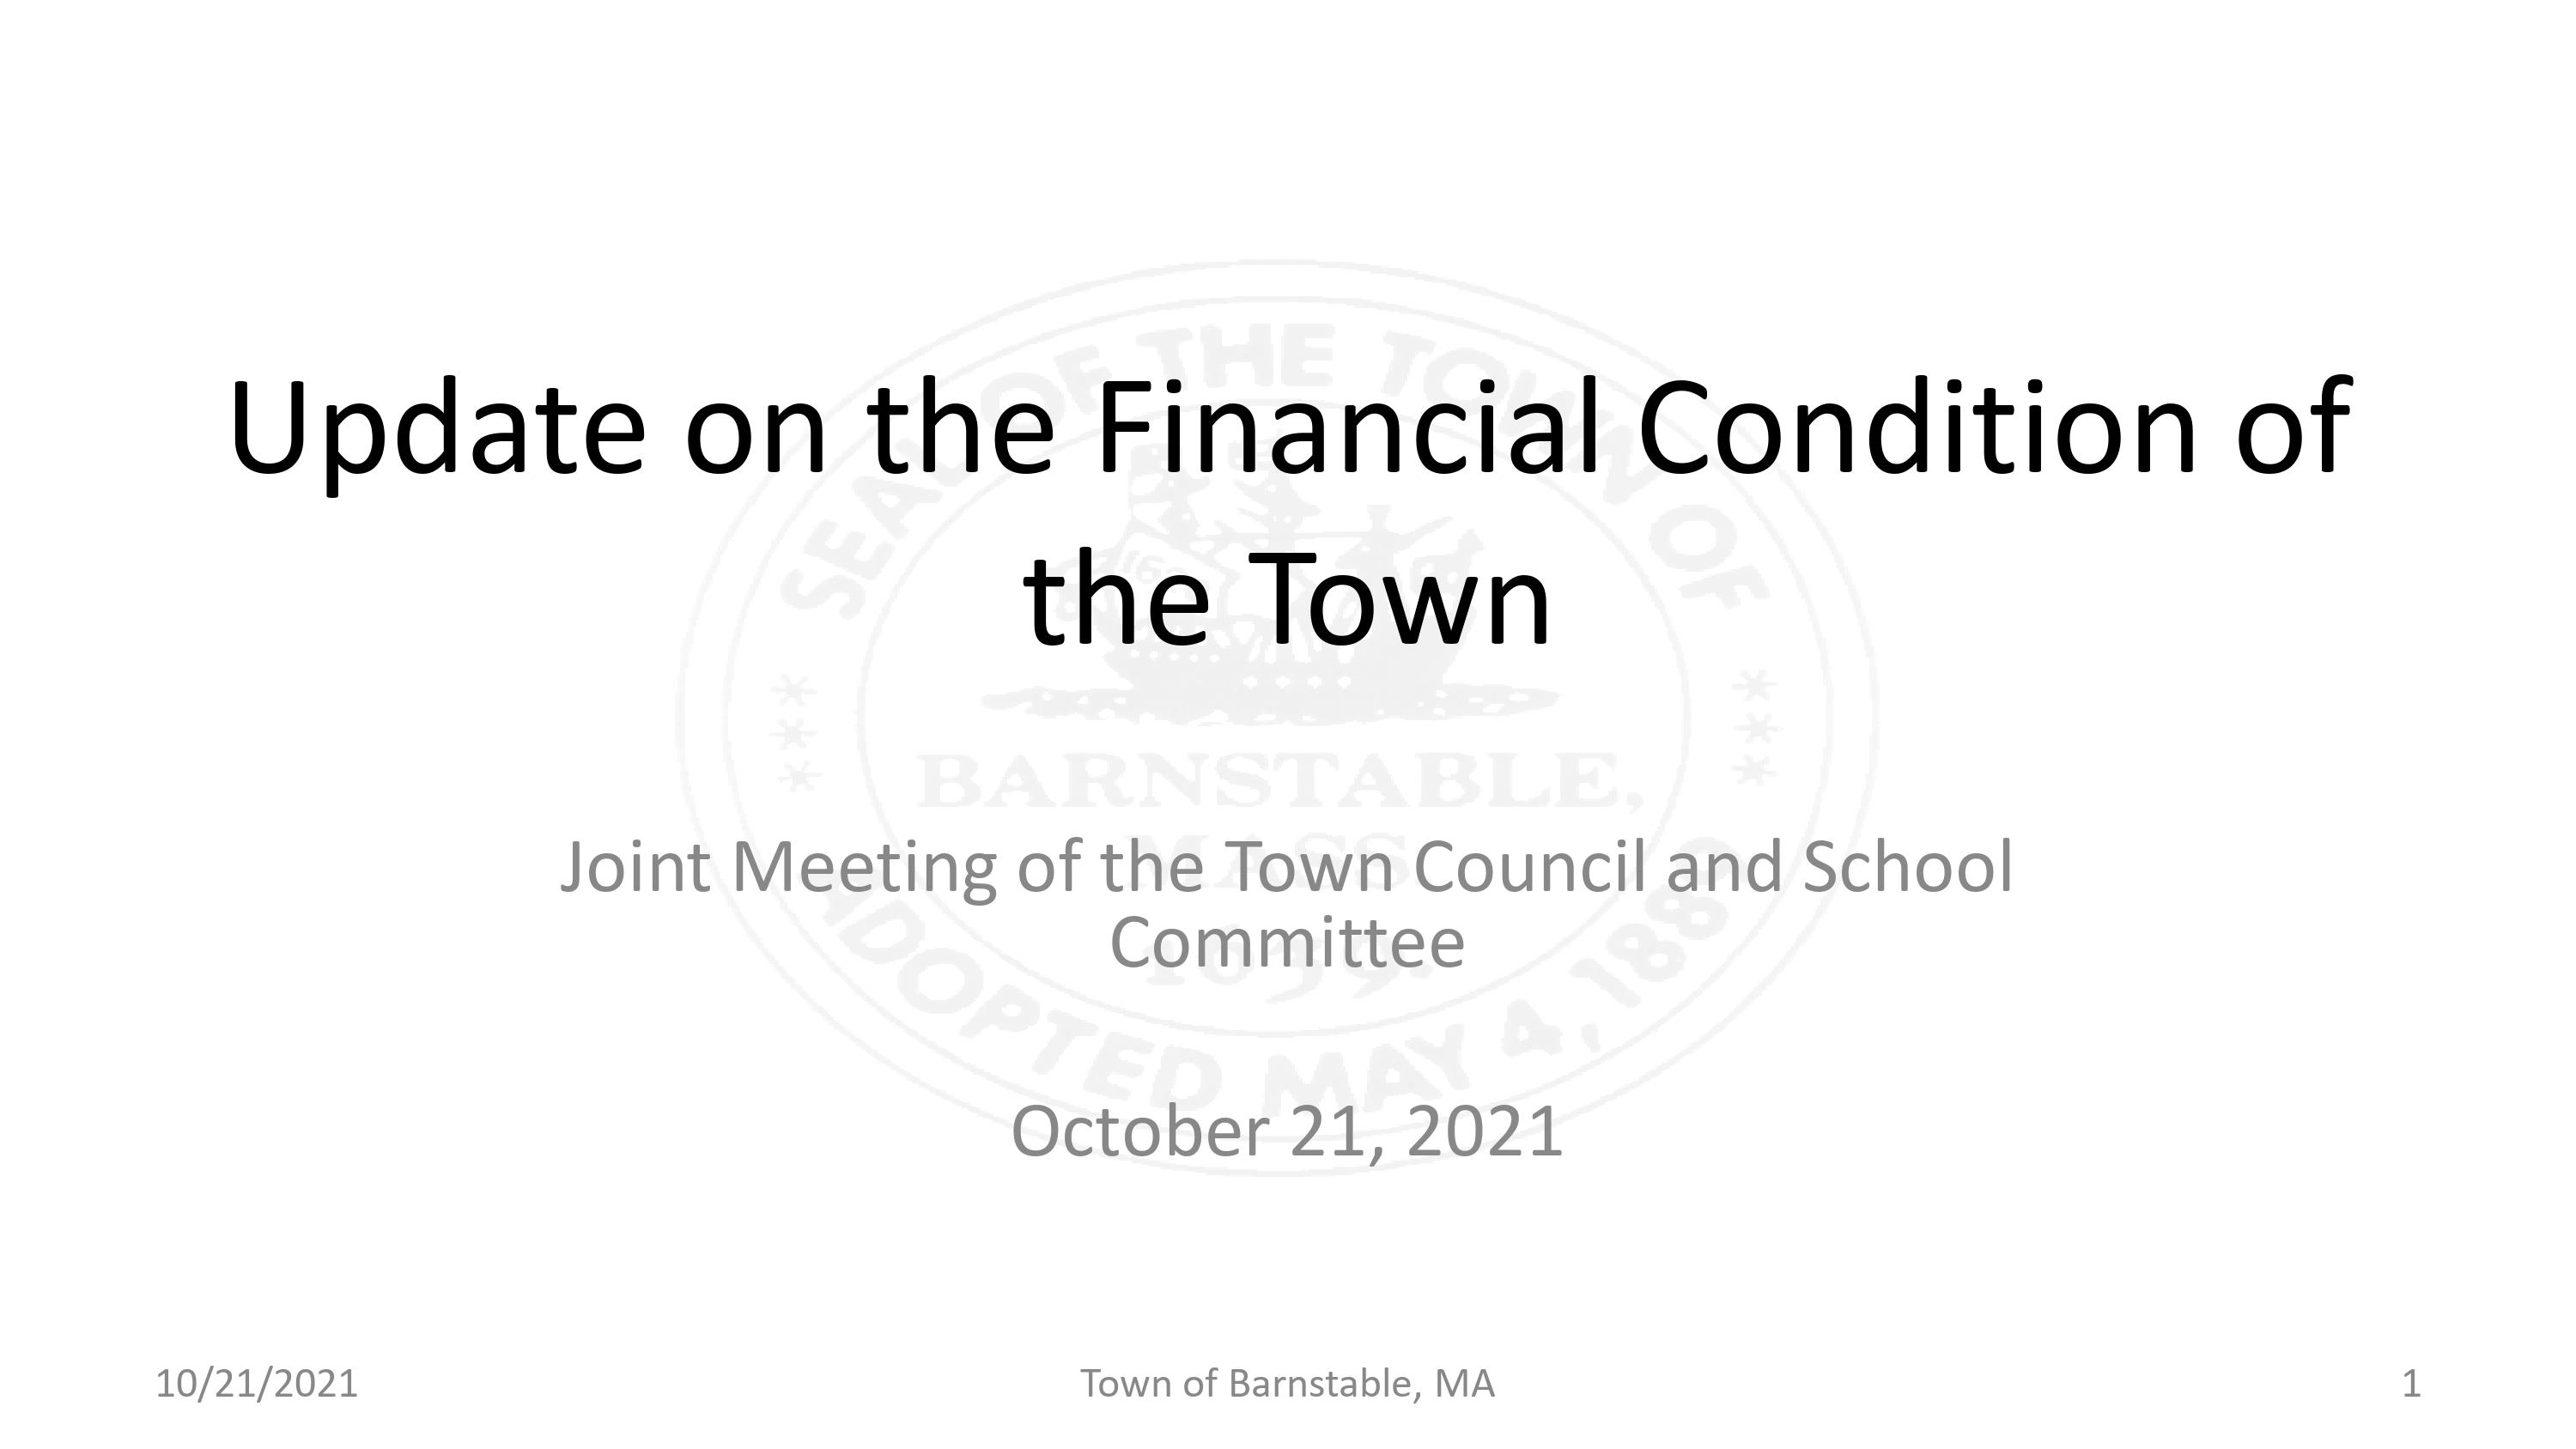 Update on the Financial Condition of the Town